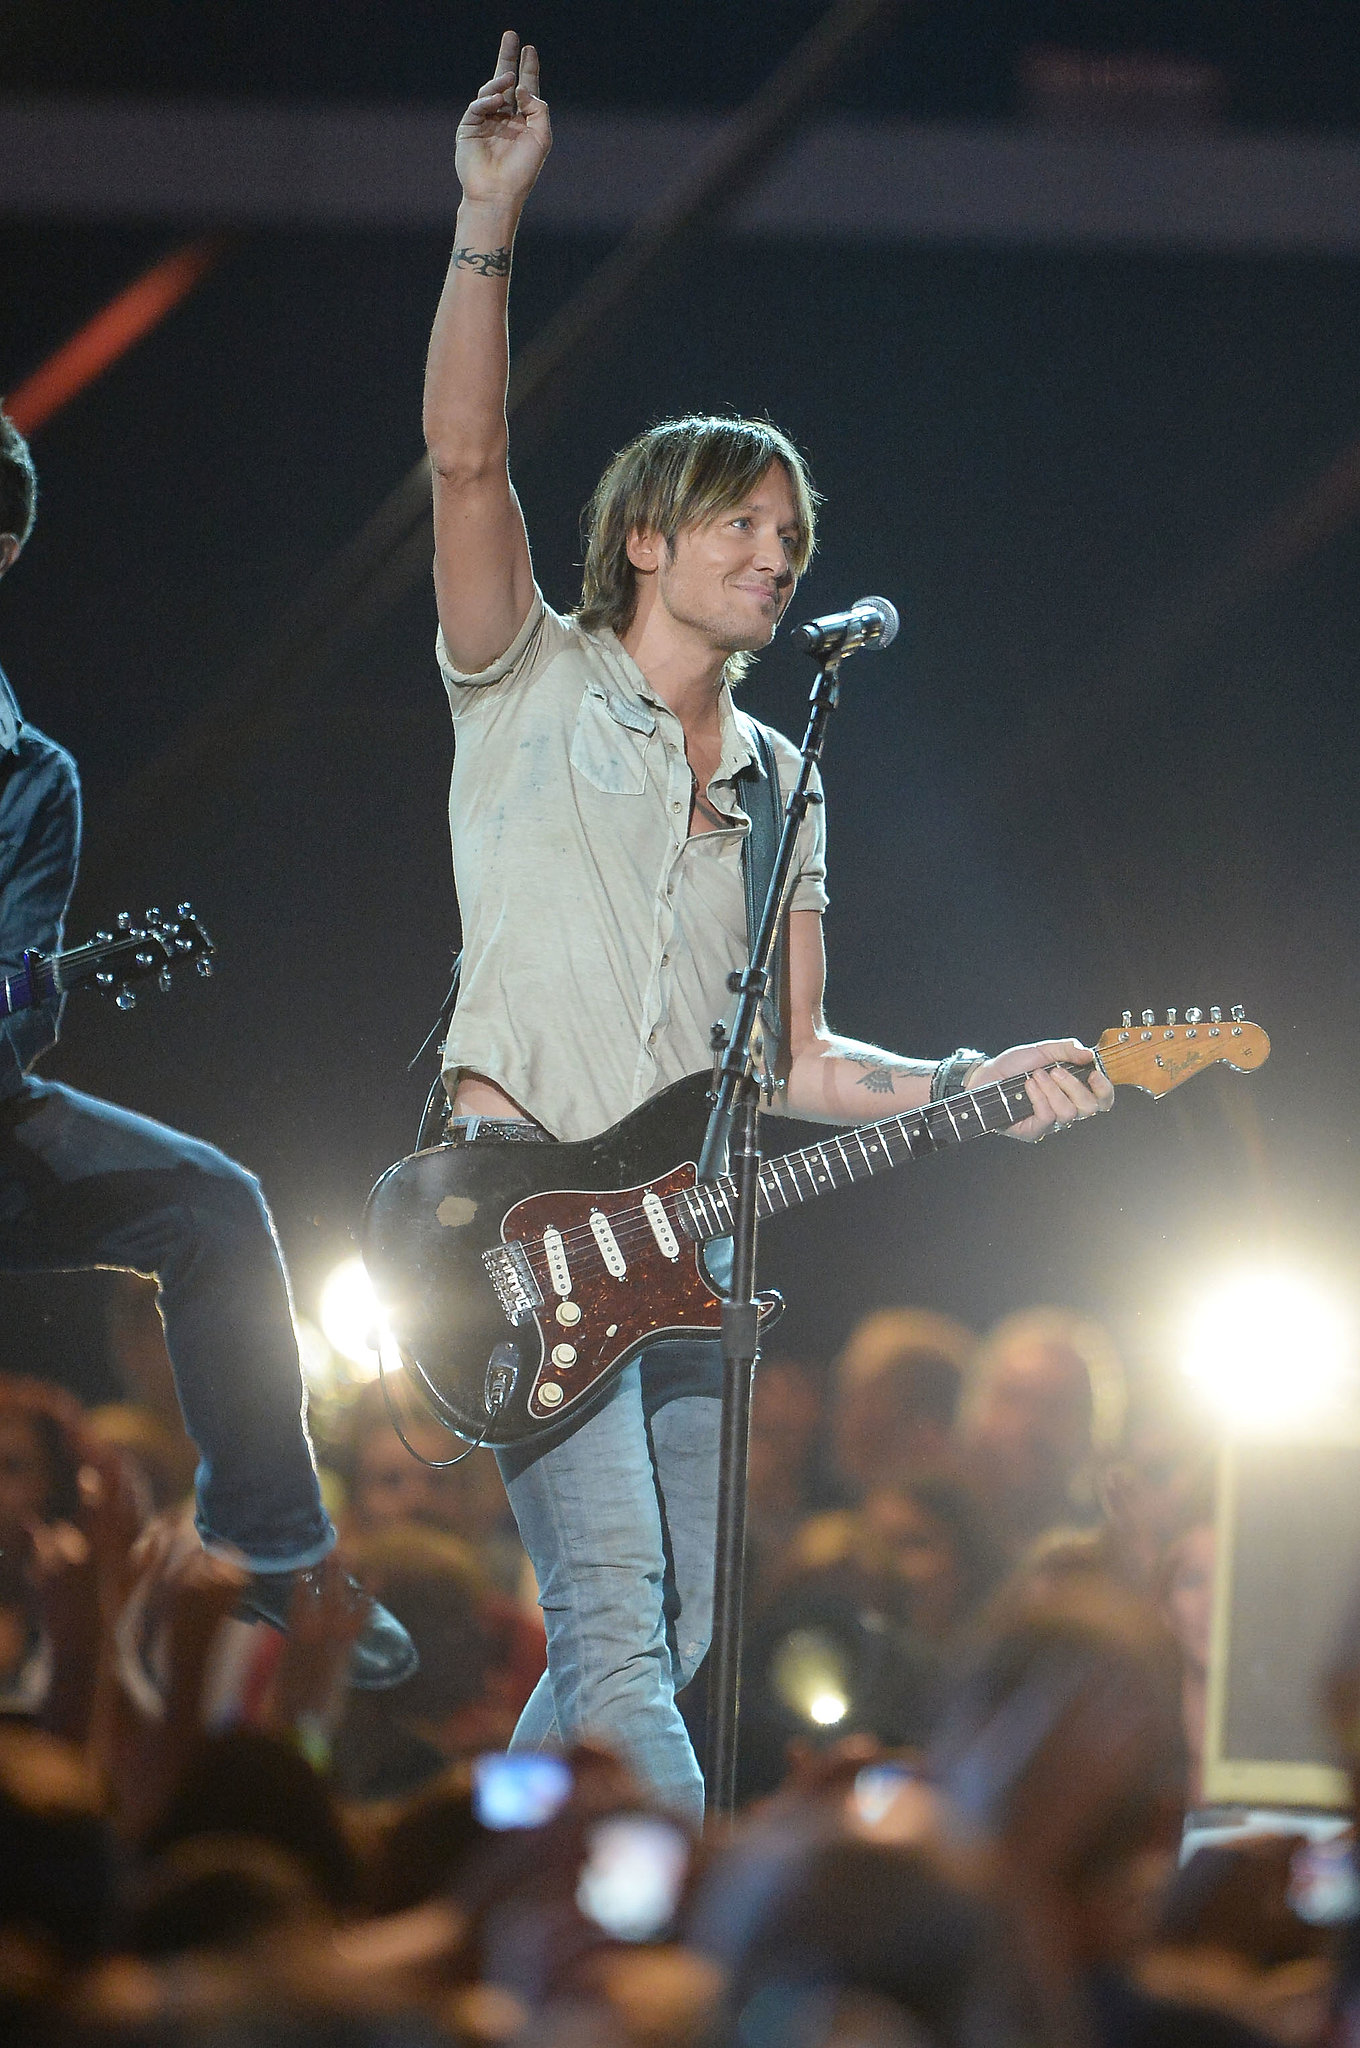 Keith Urban on stage at the CMT Awards. All the Action Inside the CMT